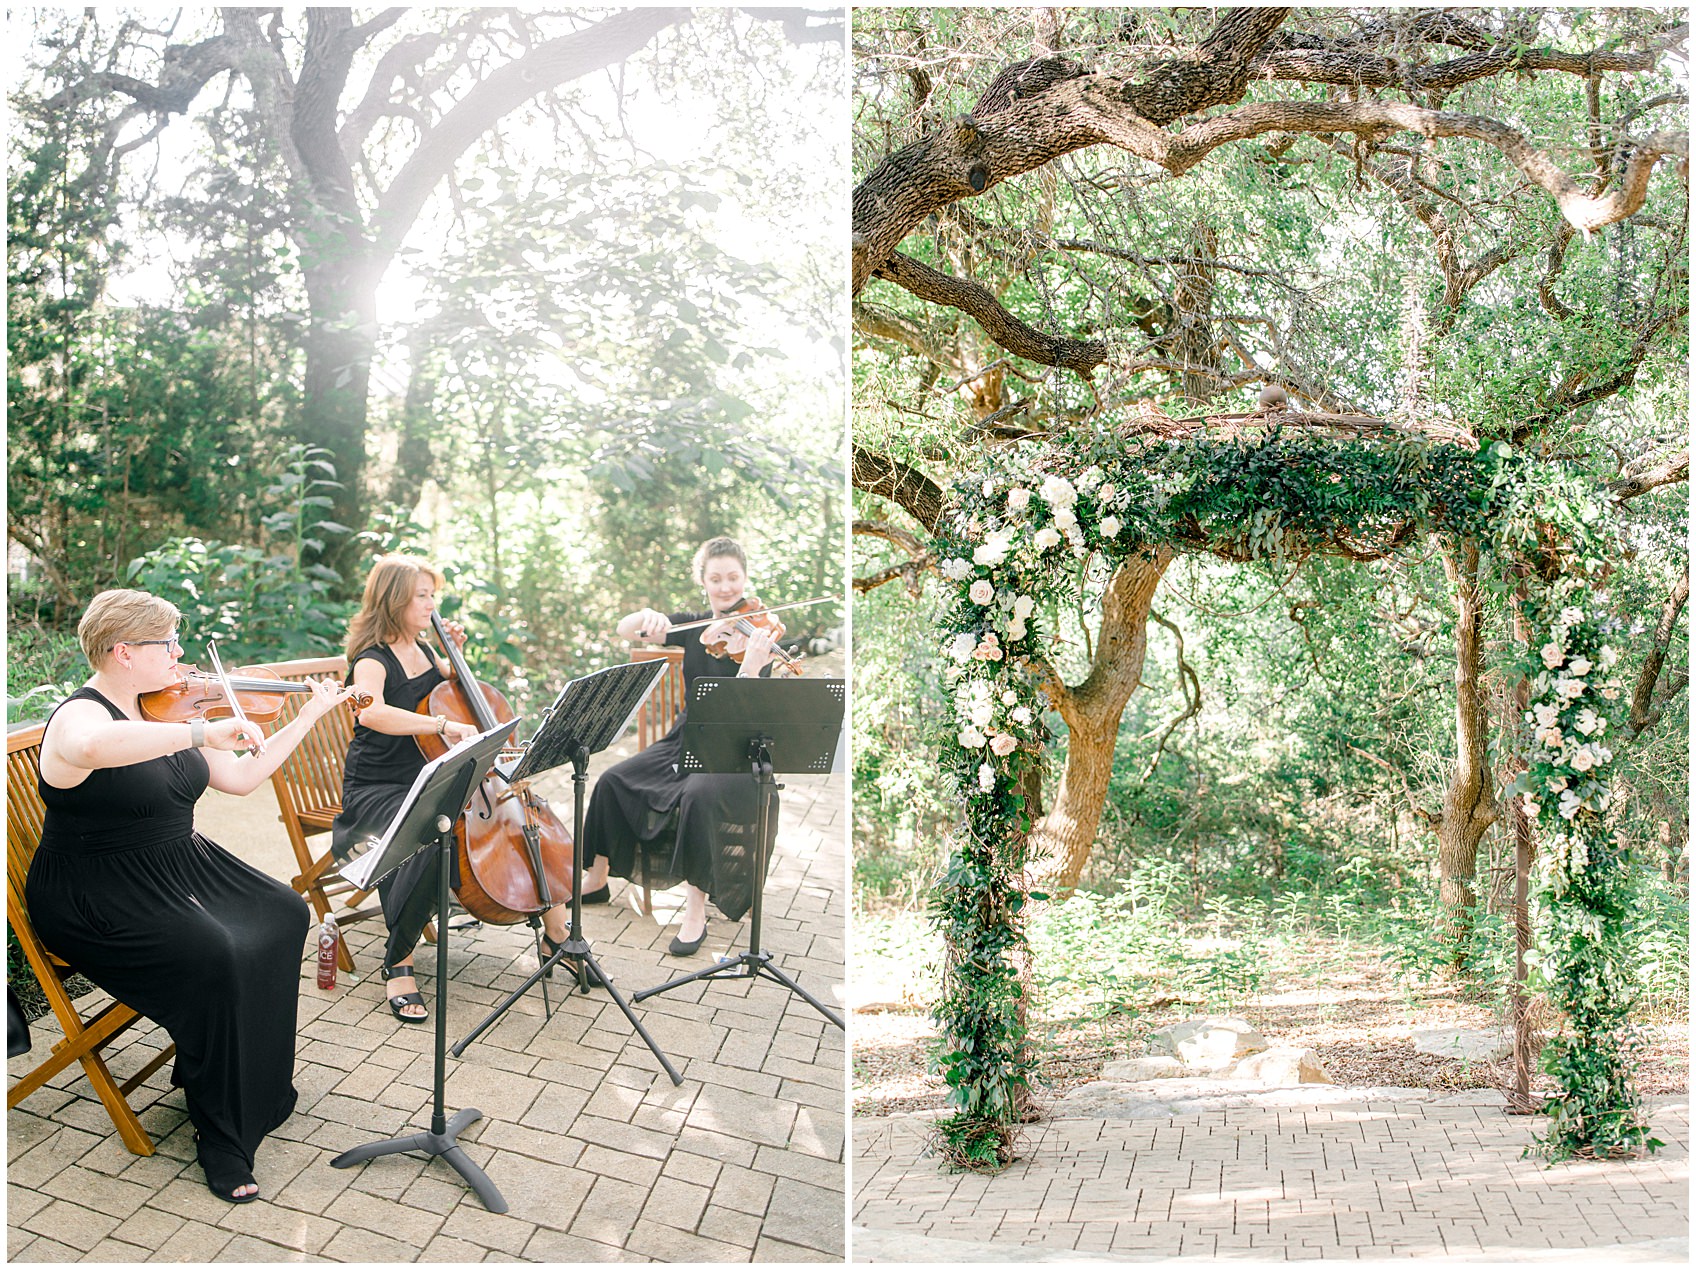 camp lucy wedding by Allison Jeffers Photography 0058 1